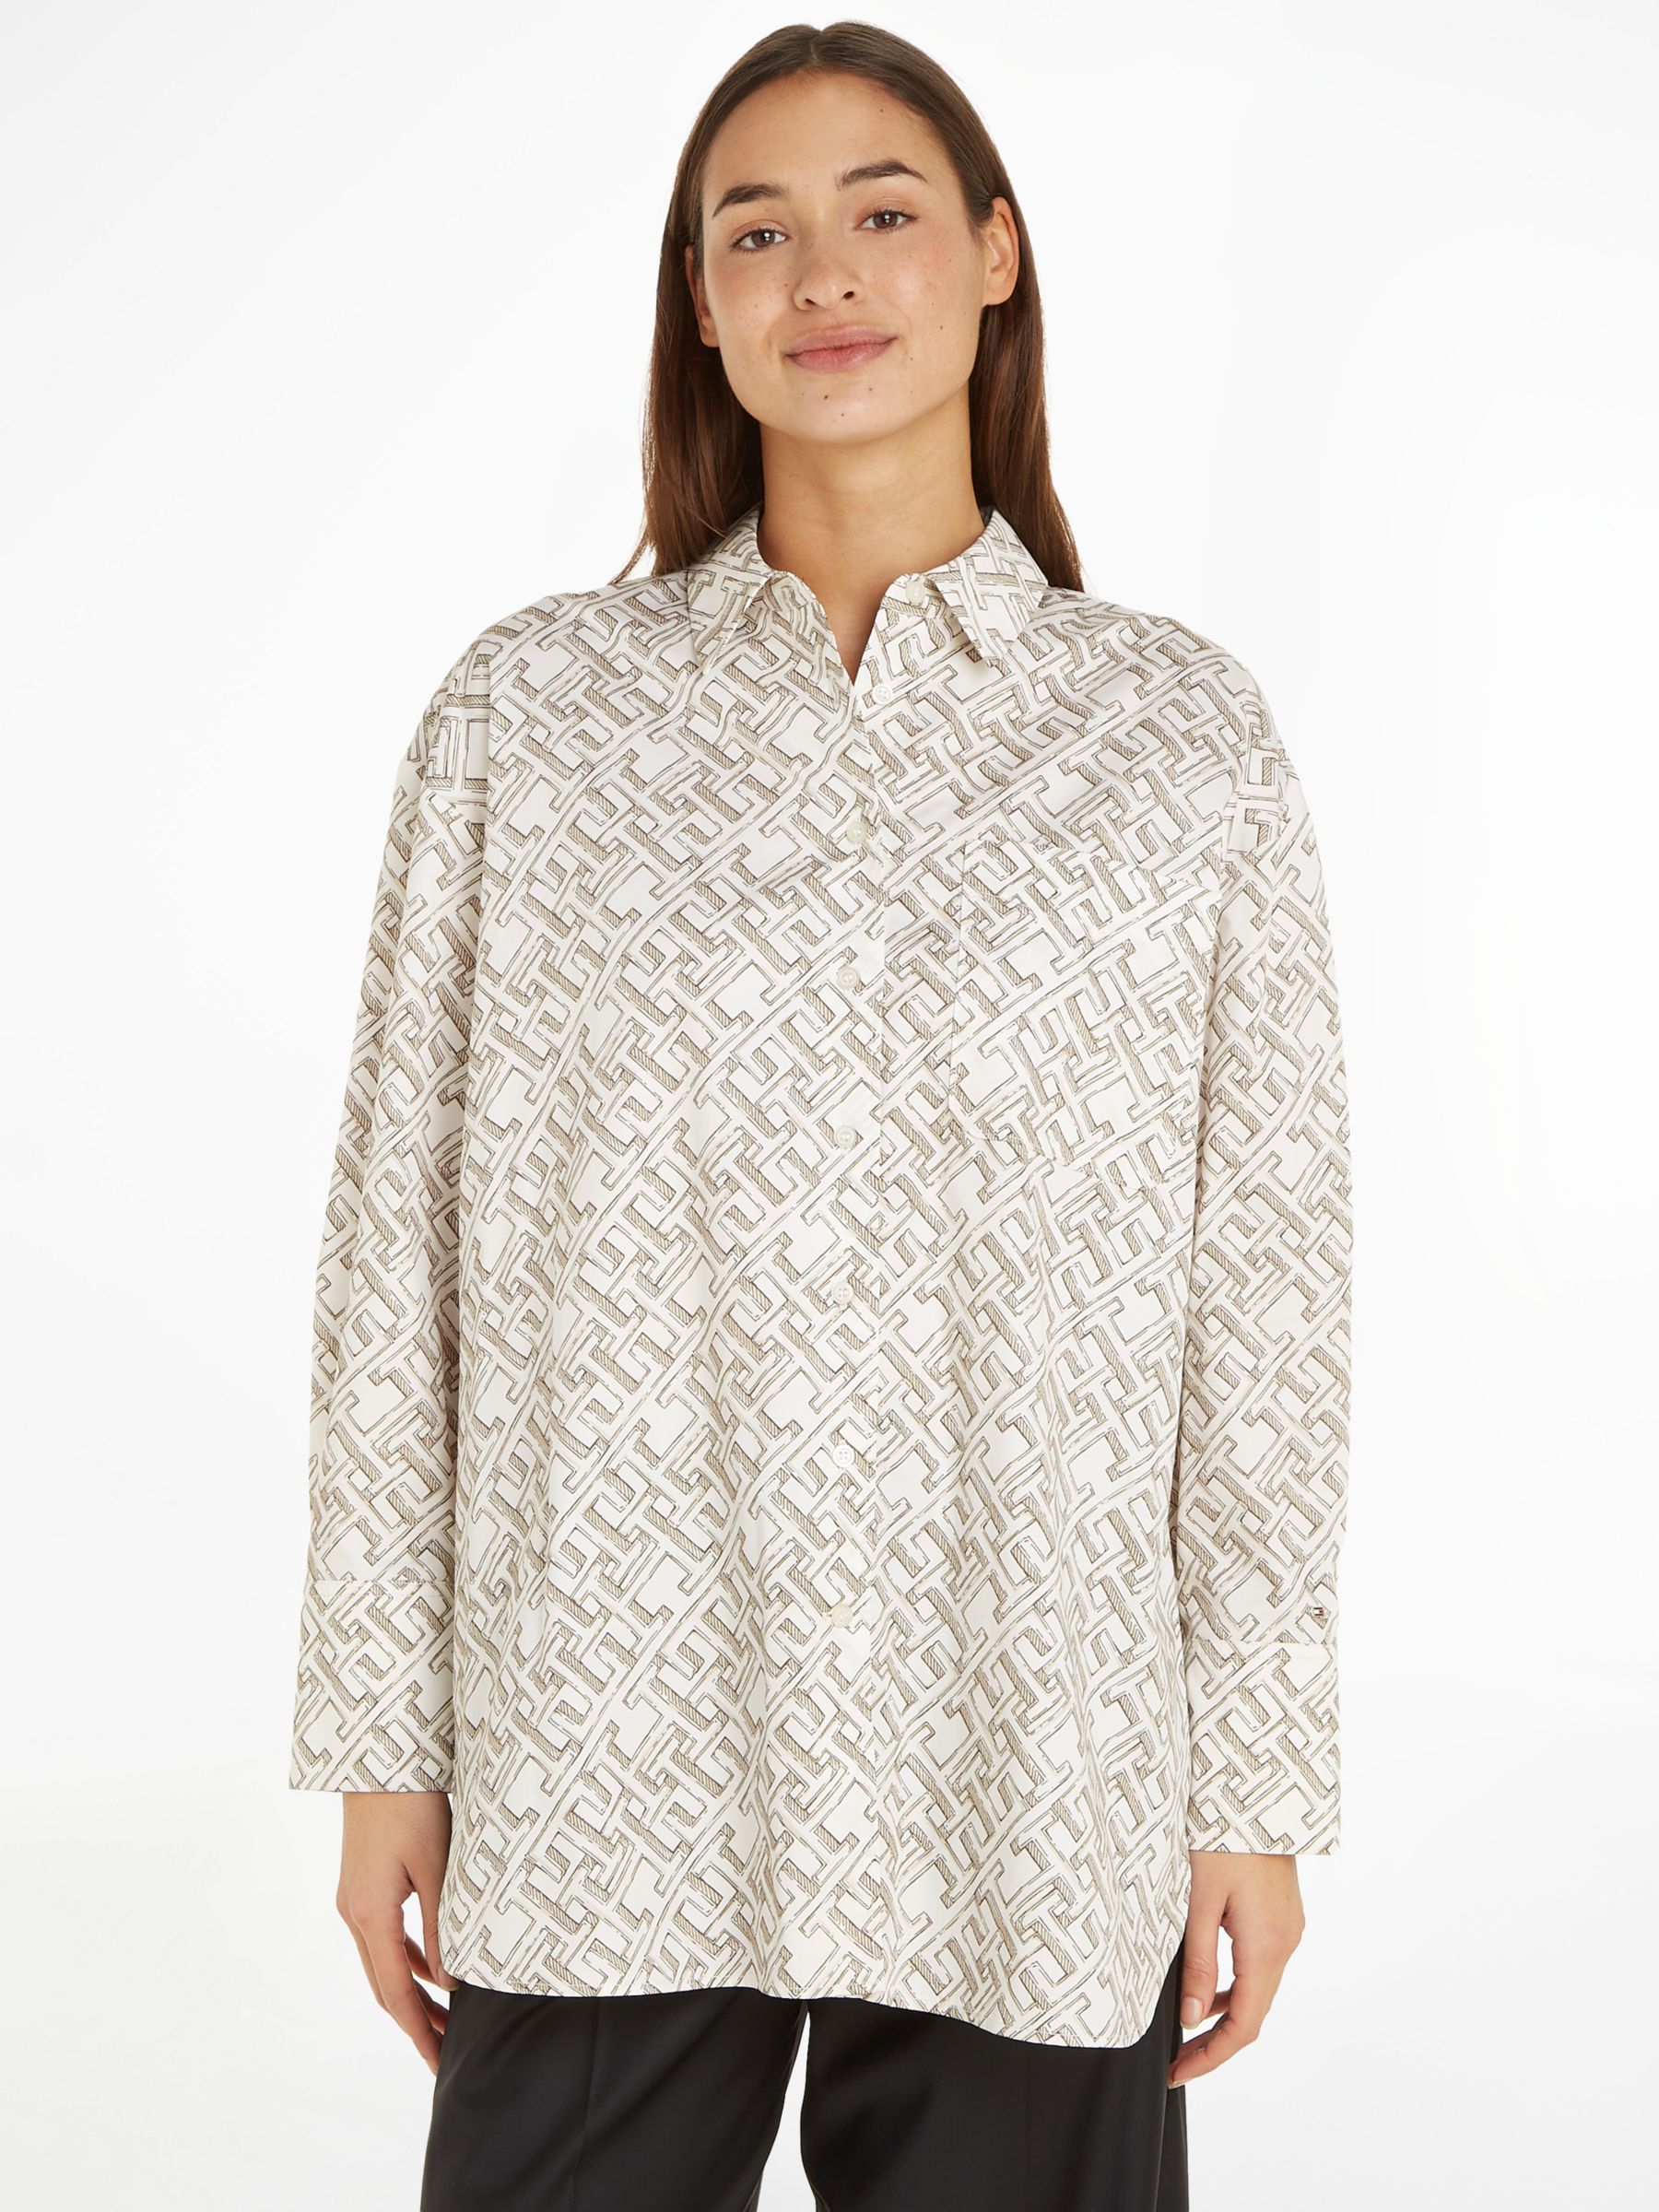 Tommy Hilfiger Relaxed Print Shirt, Illustrated White